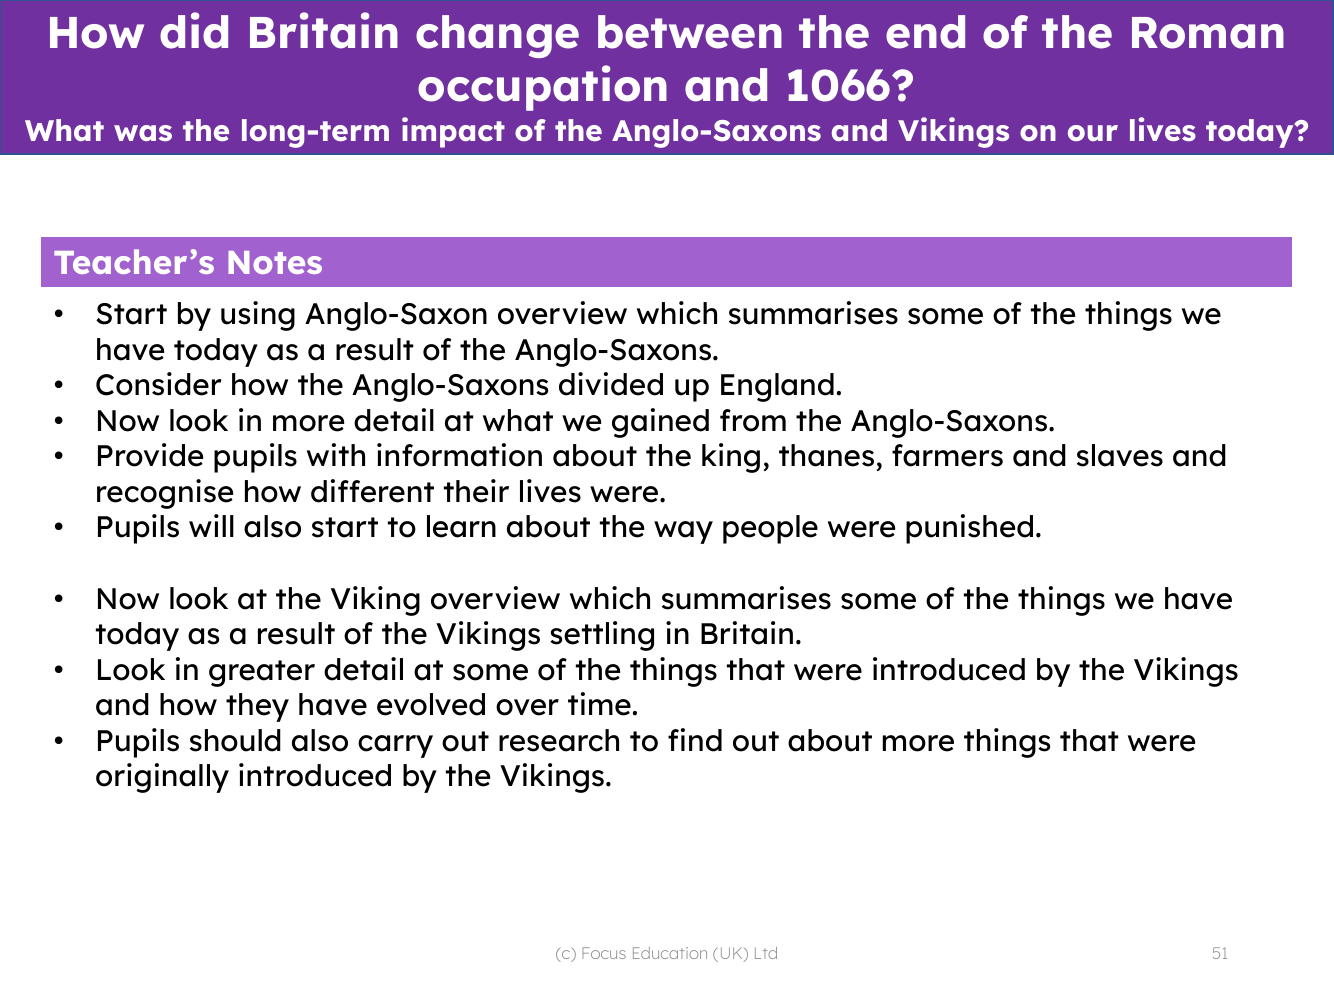 What was the long-term impact of the Anglo-Saxons and Vikings on our lives today? - Teacher notes